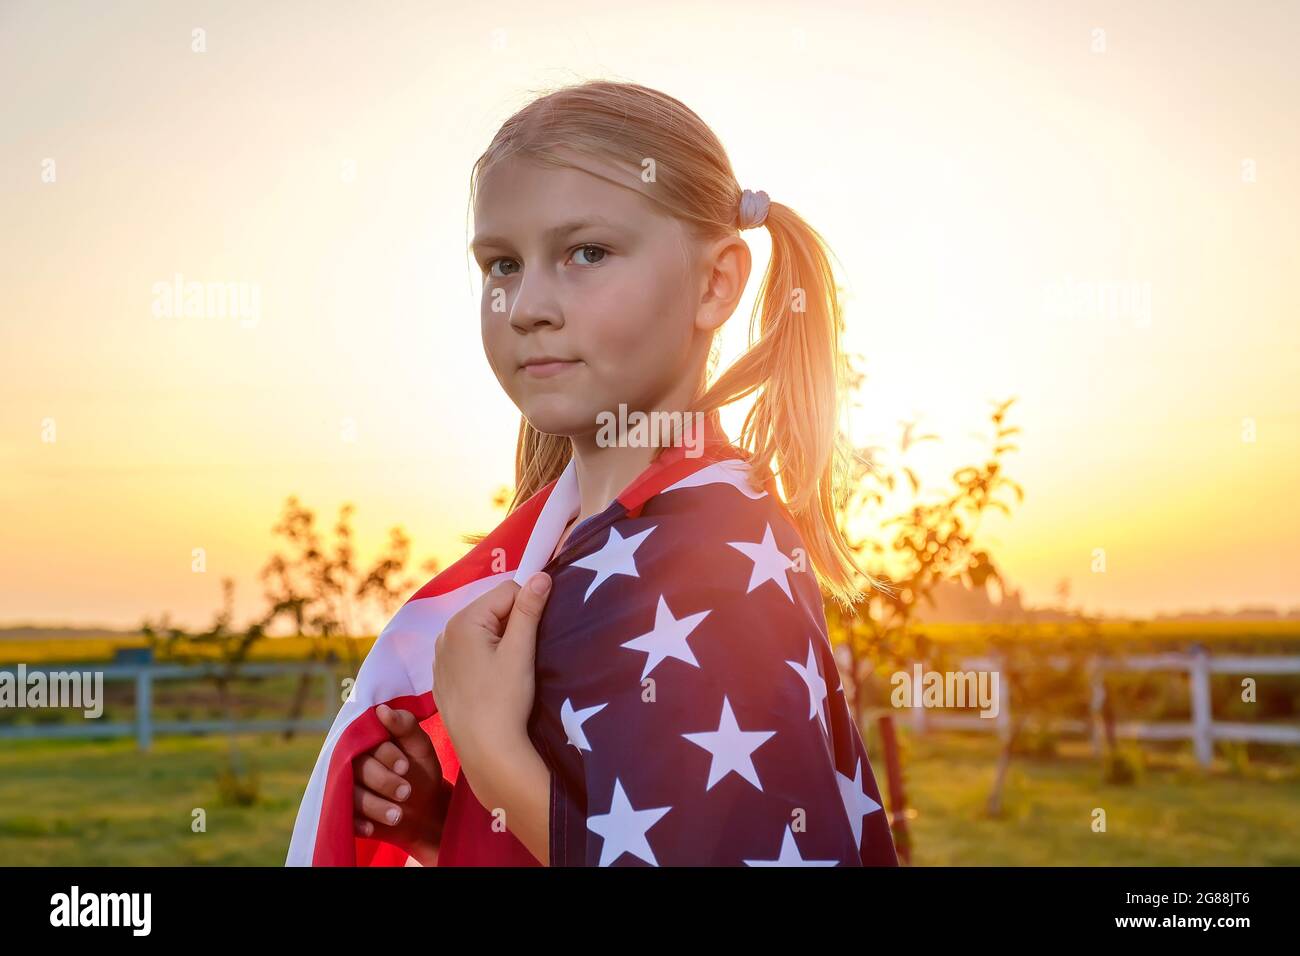 Portrait of a cute little girl, wrapped in an American flag, standing in a field Stock Photo